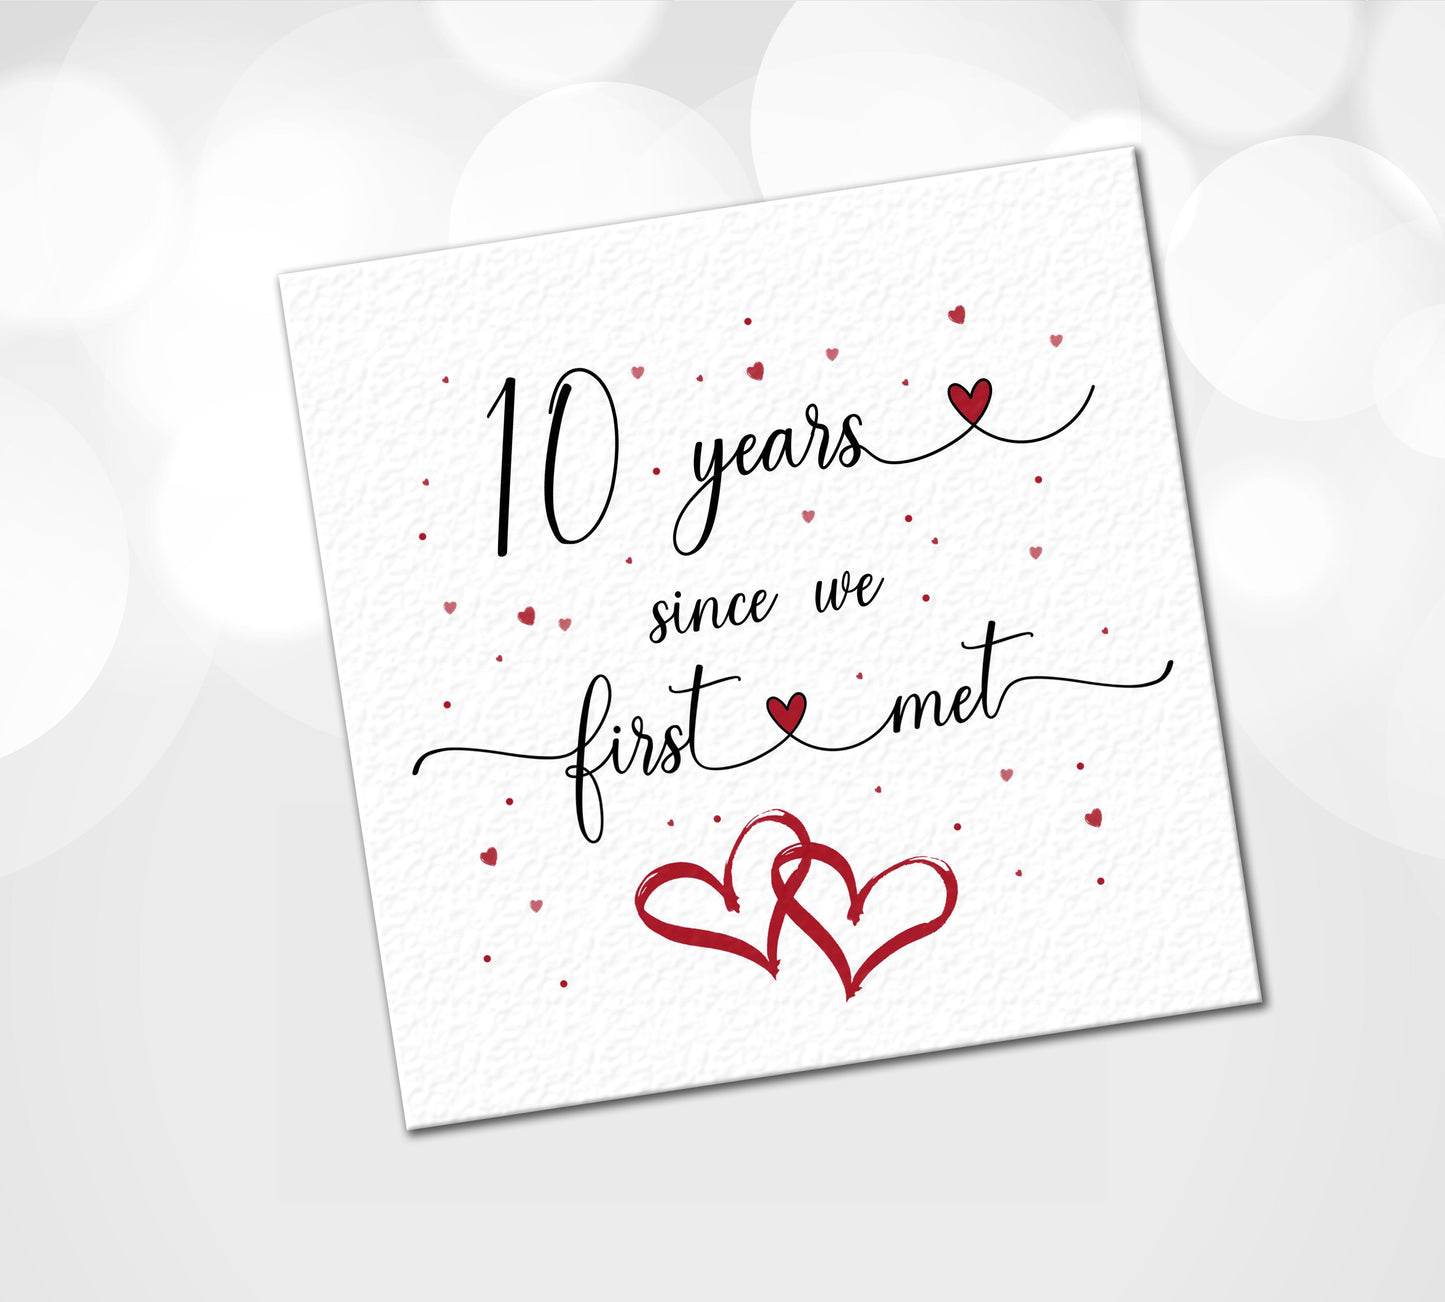 Since we met anniversary card illustrated with love hearts.  Can be personalised with number of years